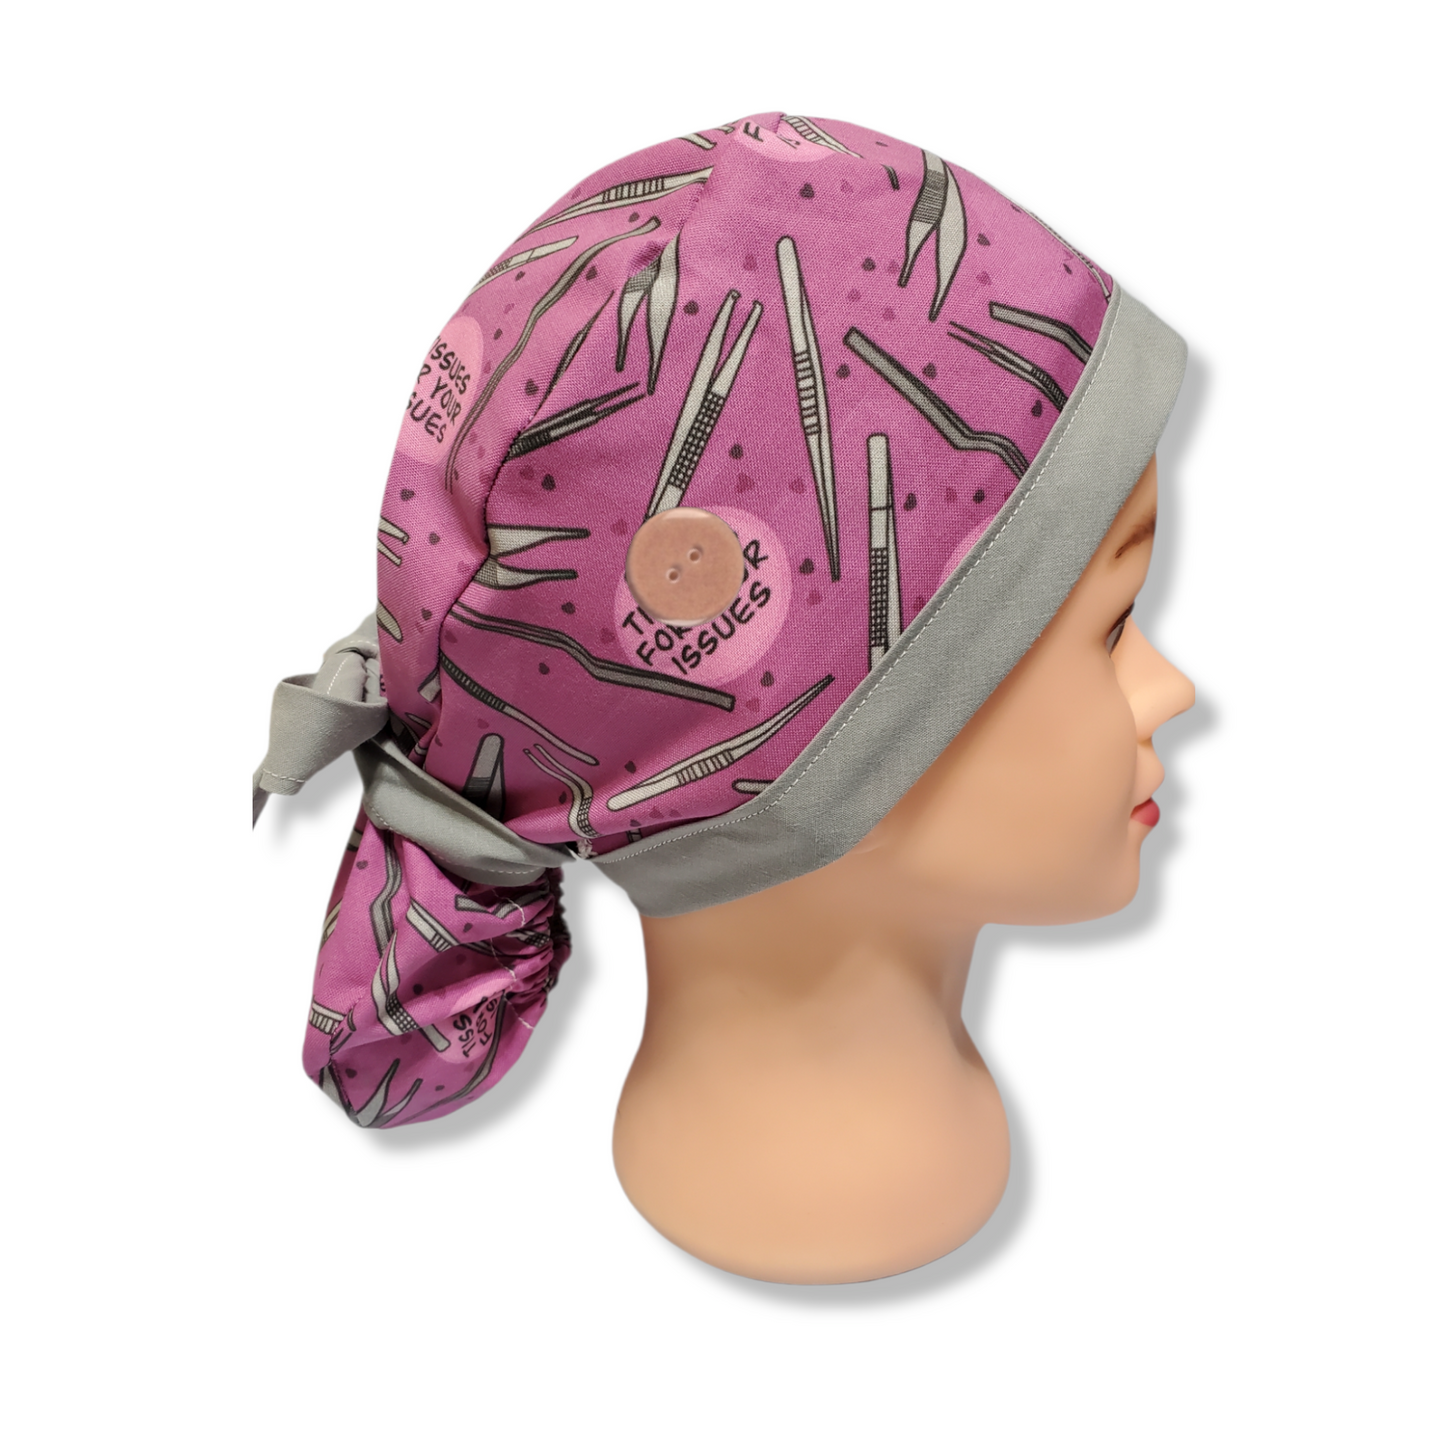 Scrub Cap Tissues for your Issues